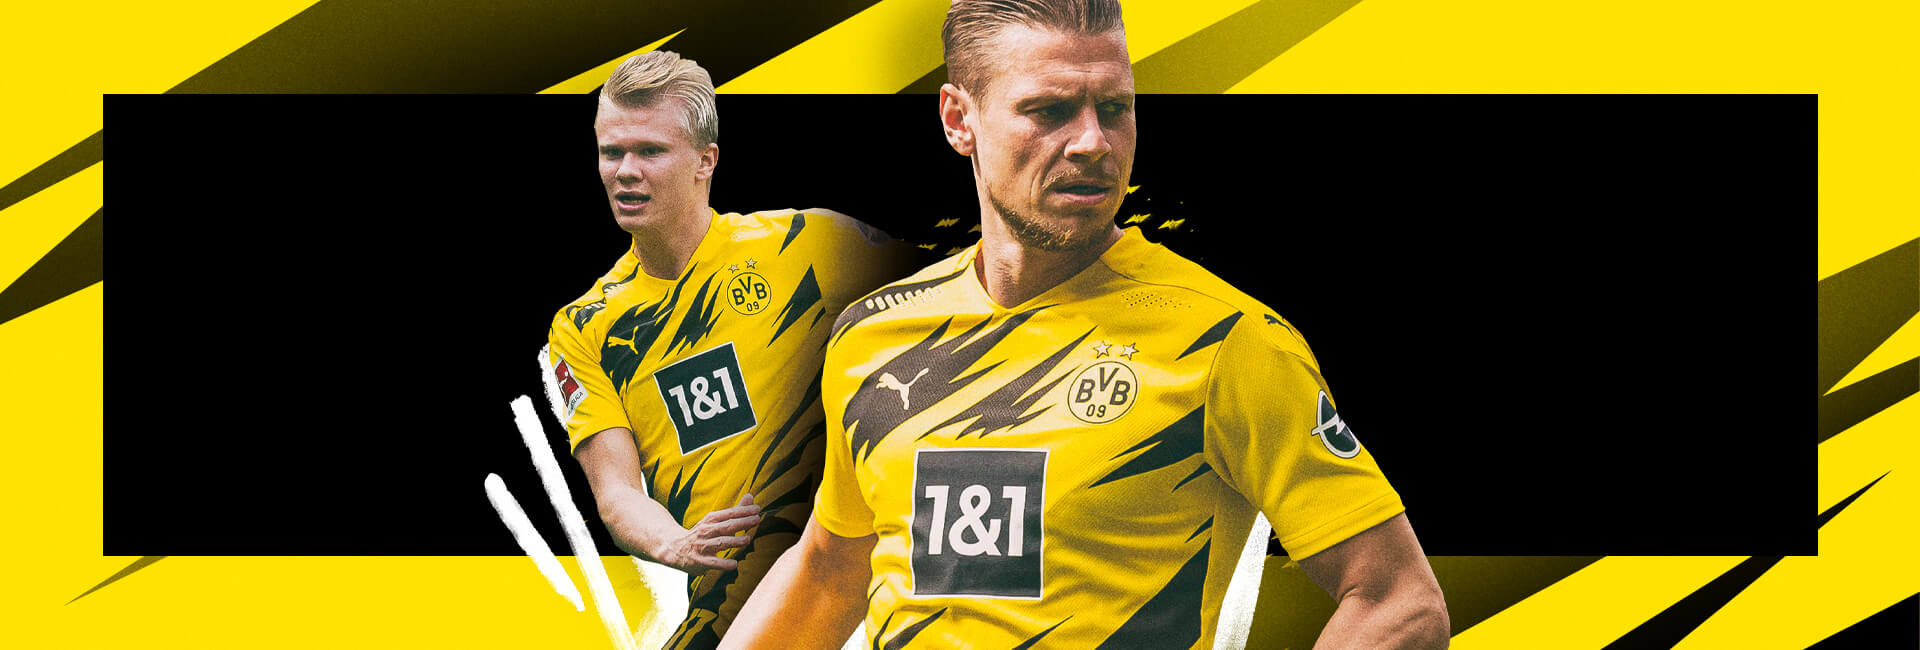 bvb authentic jersey